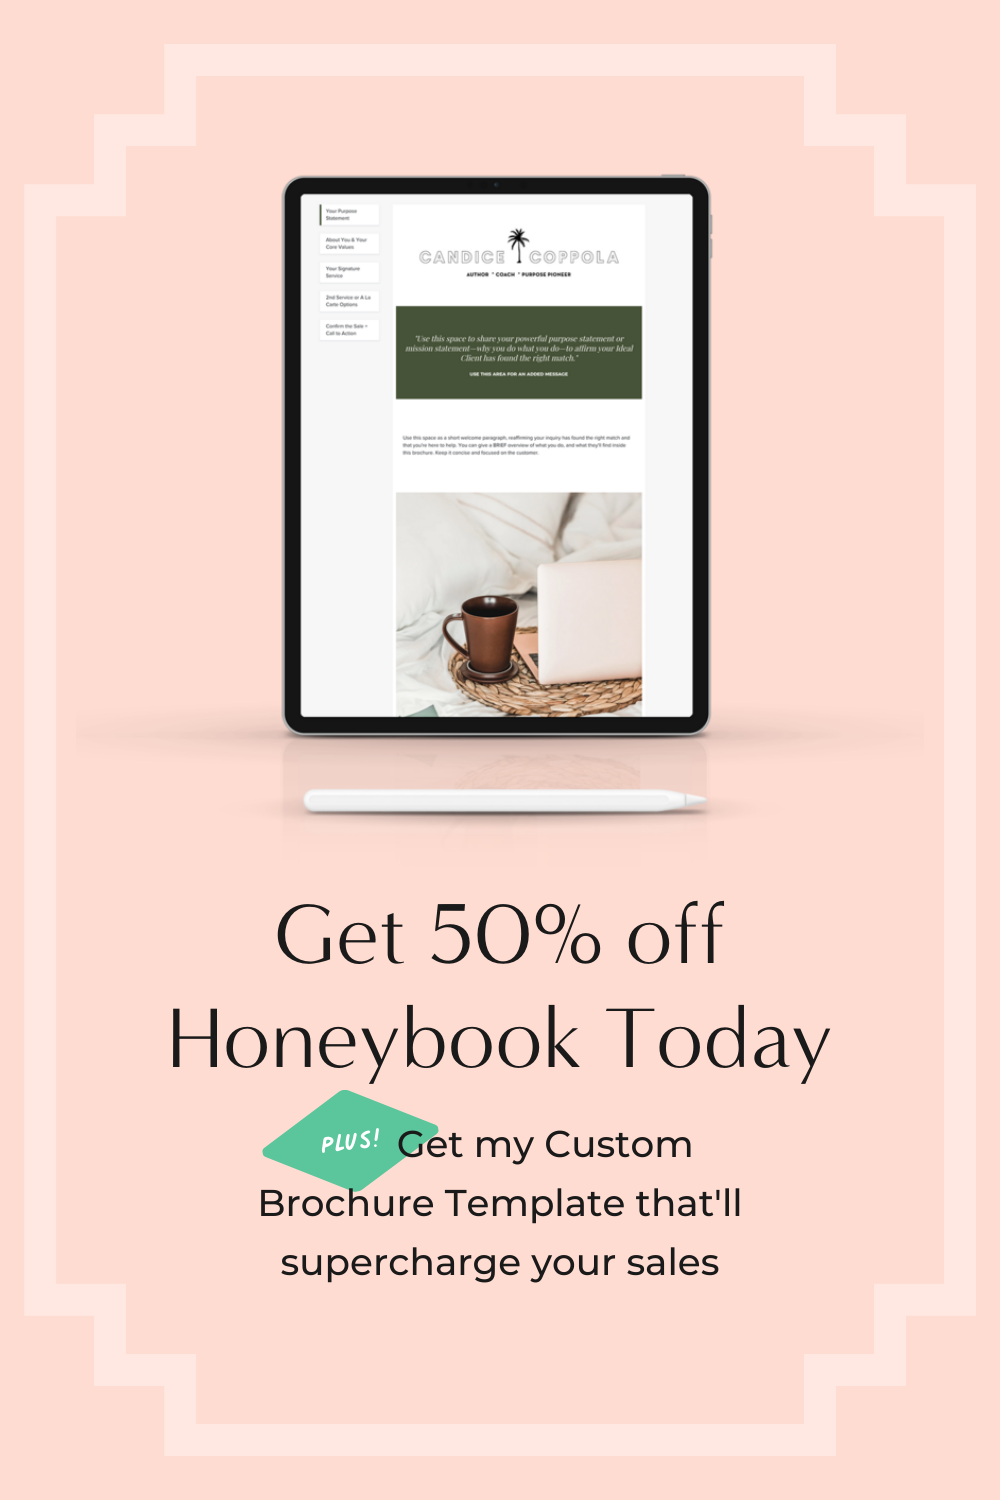 Honeybook promo code! Honeybook is a client management systems that lets you automate your sales process. Use this 50% off code to receive $200 off your first year of Honeybook. Sign up for a trial below using the link and when you're ready, you'll automatically get 50% off!